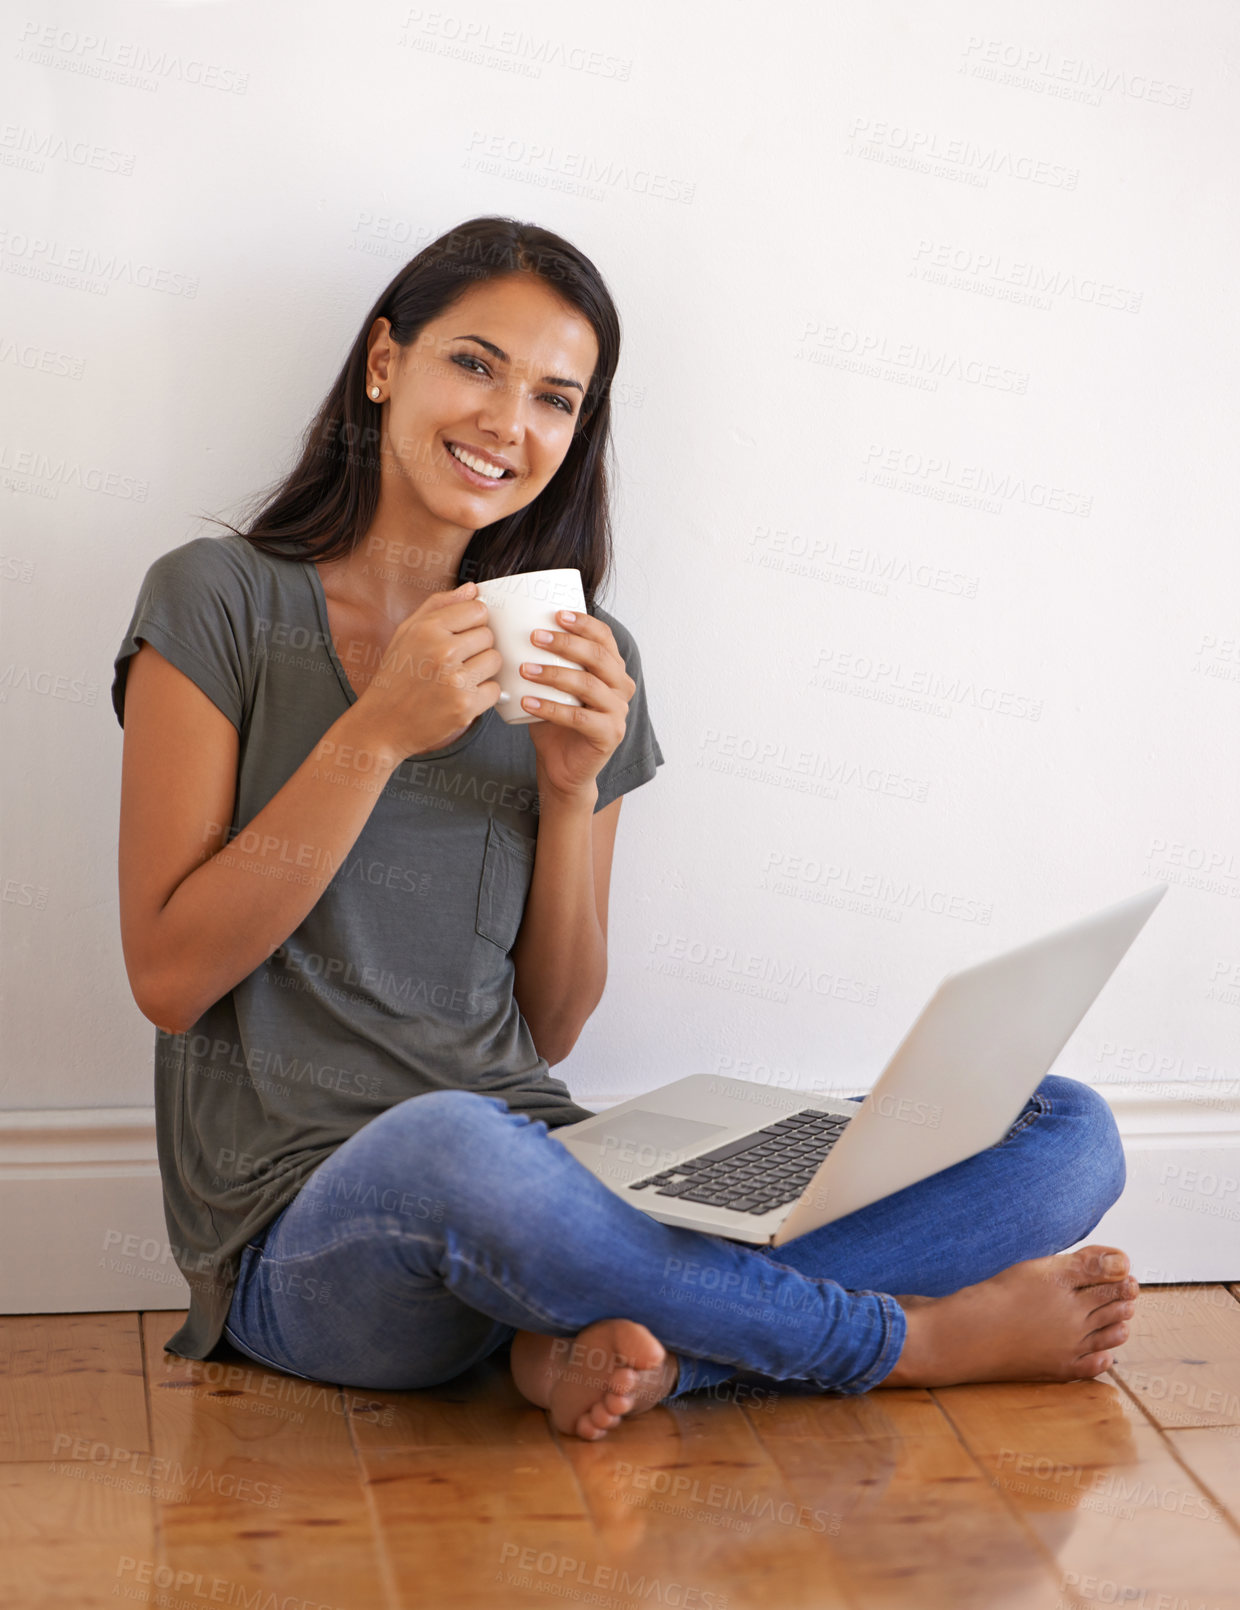 Buy stock photo Shot of a young woman sitting on the floor at home drinking a coffee and using a laptop